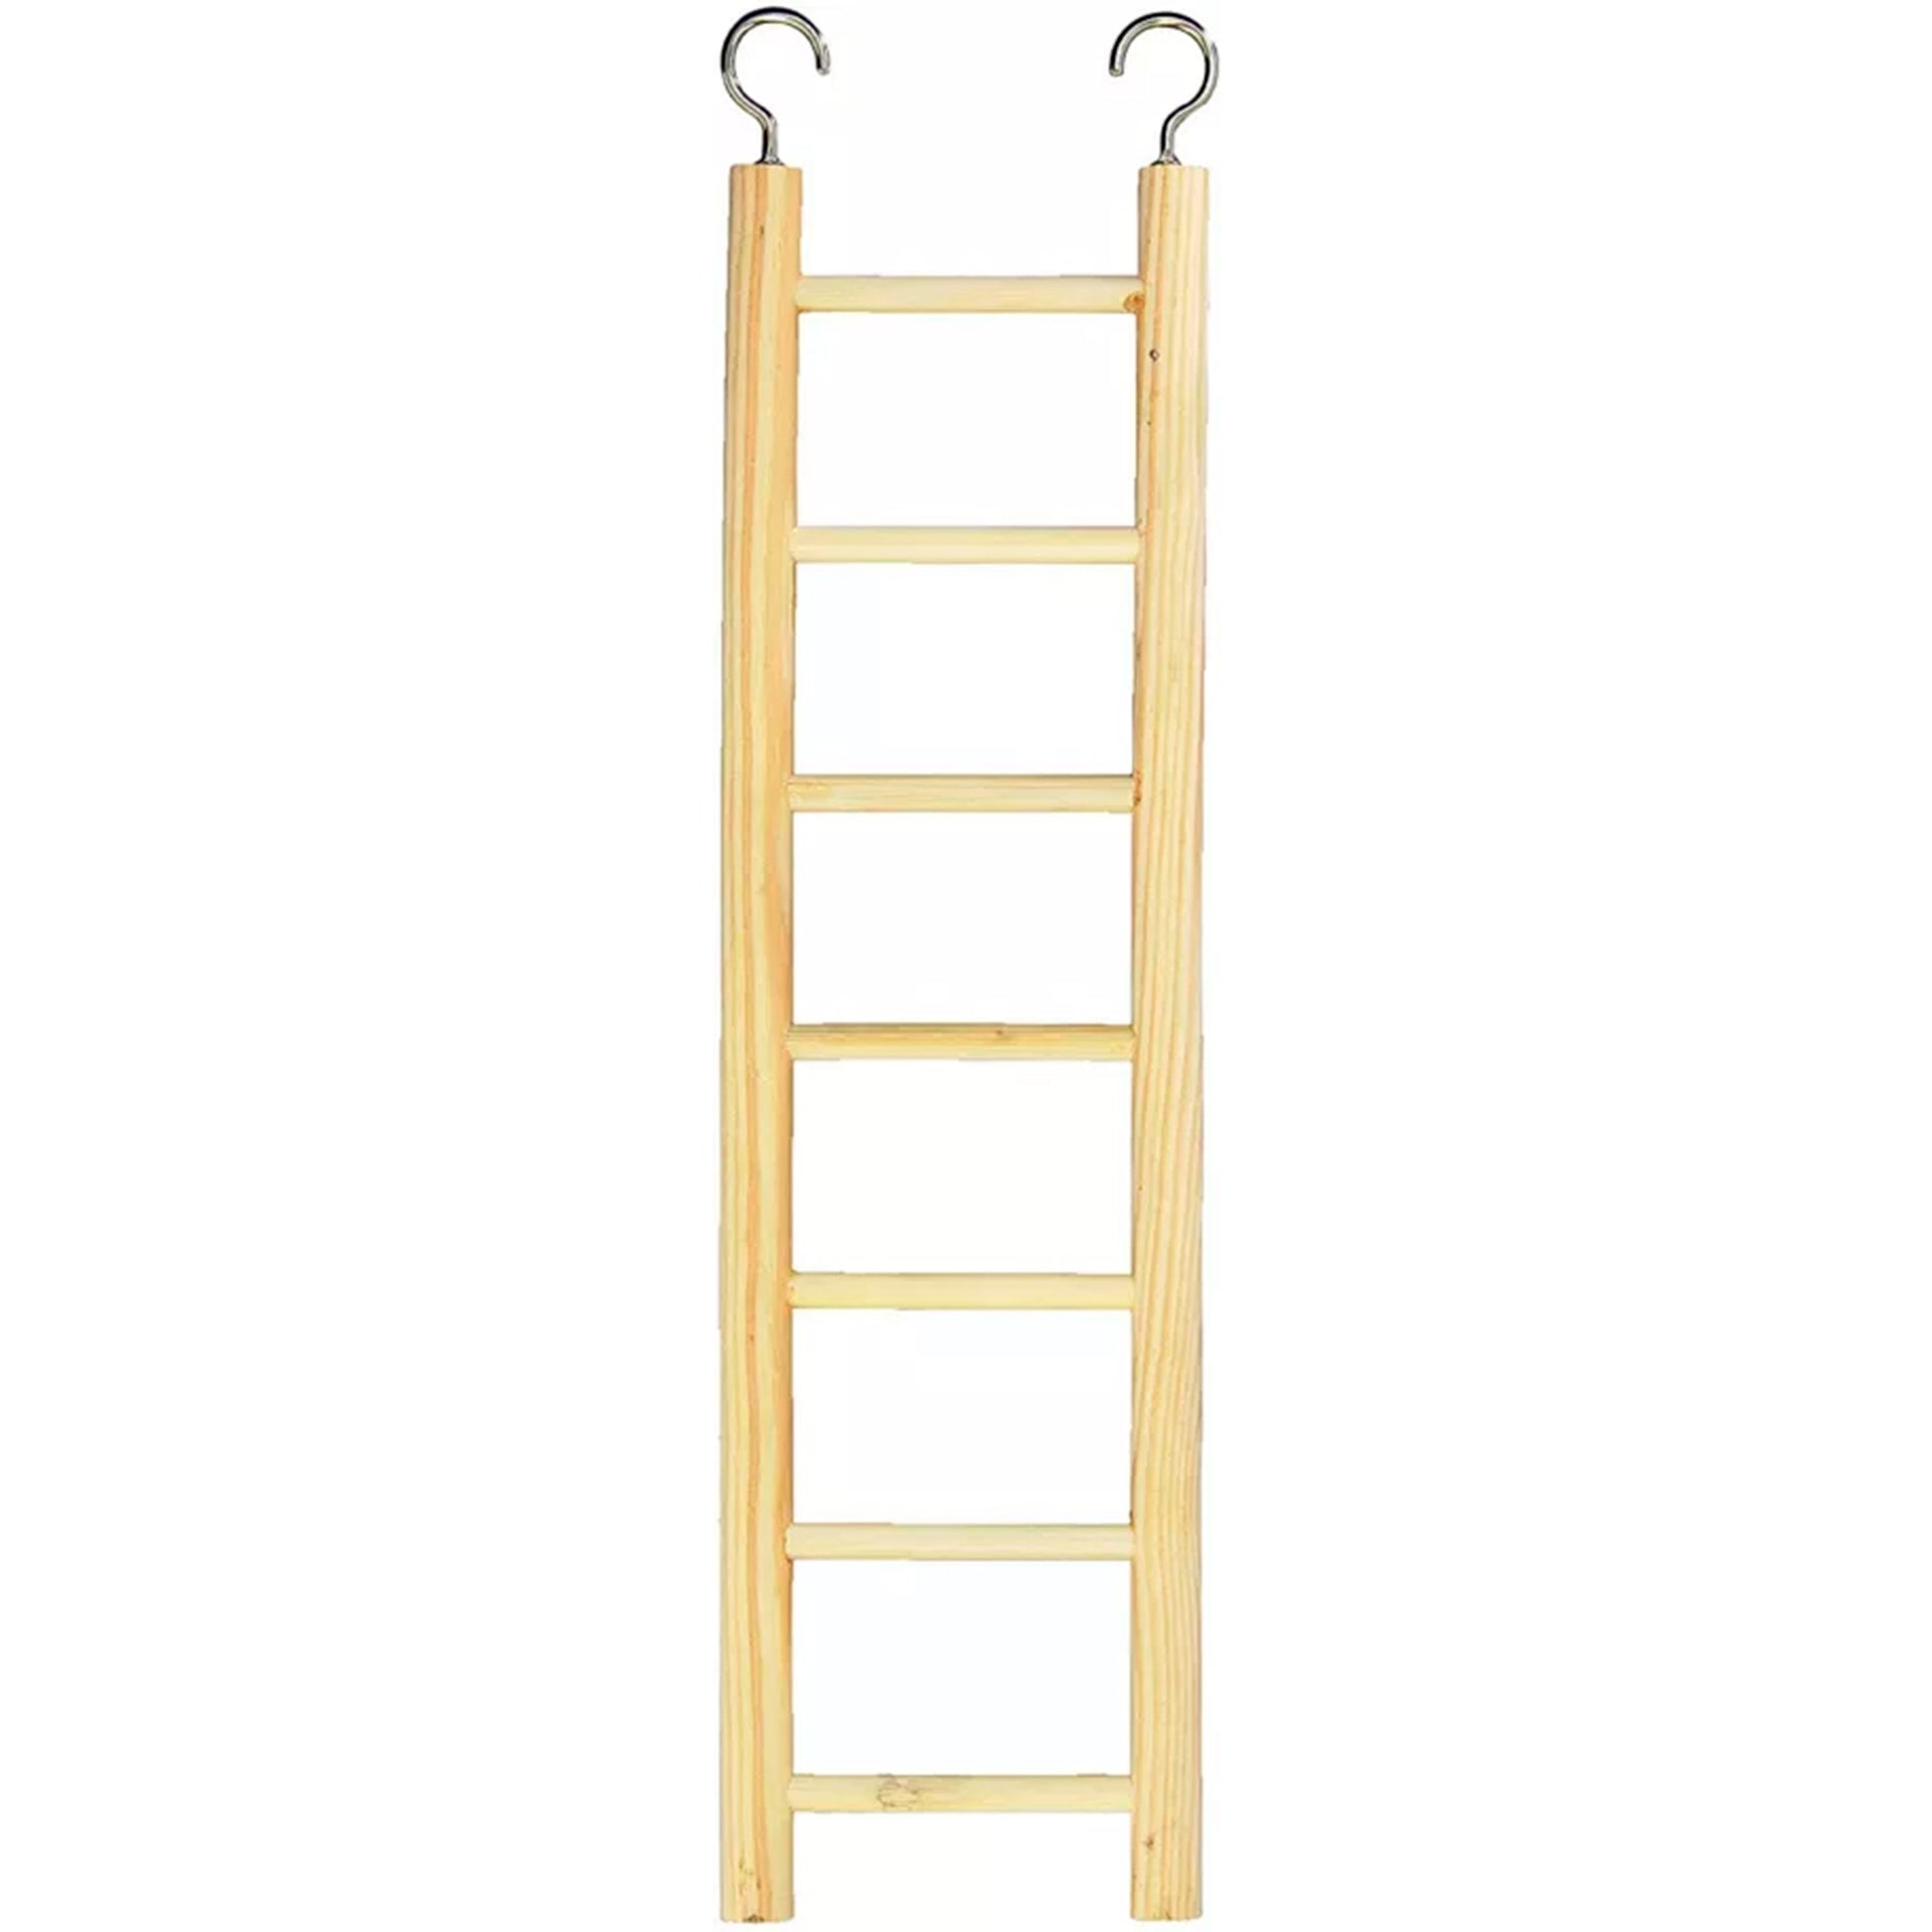 Prevue Pet Products Birdie Basics 7-Rung Ladder Unvarnished Hardwood, 2.88 in X 11.13 in, Prevue Pet Products